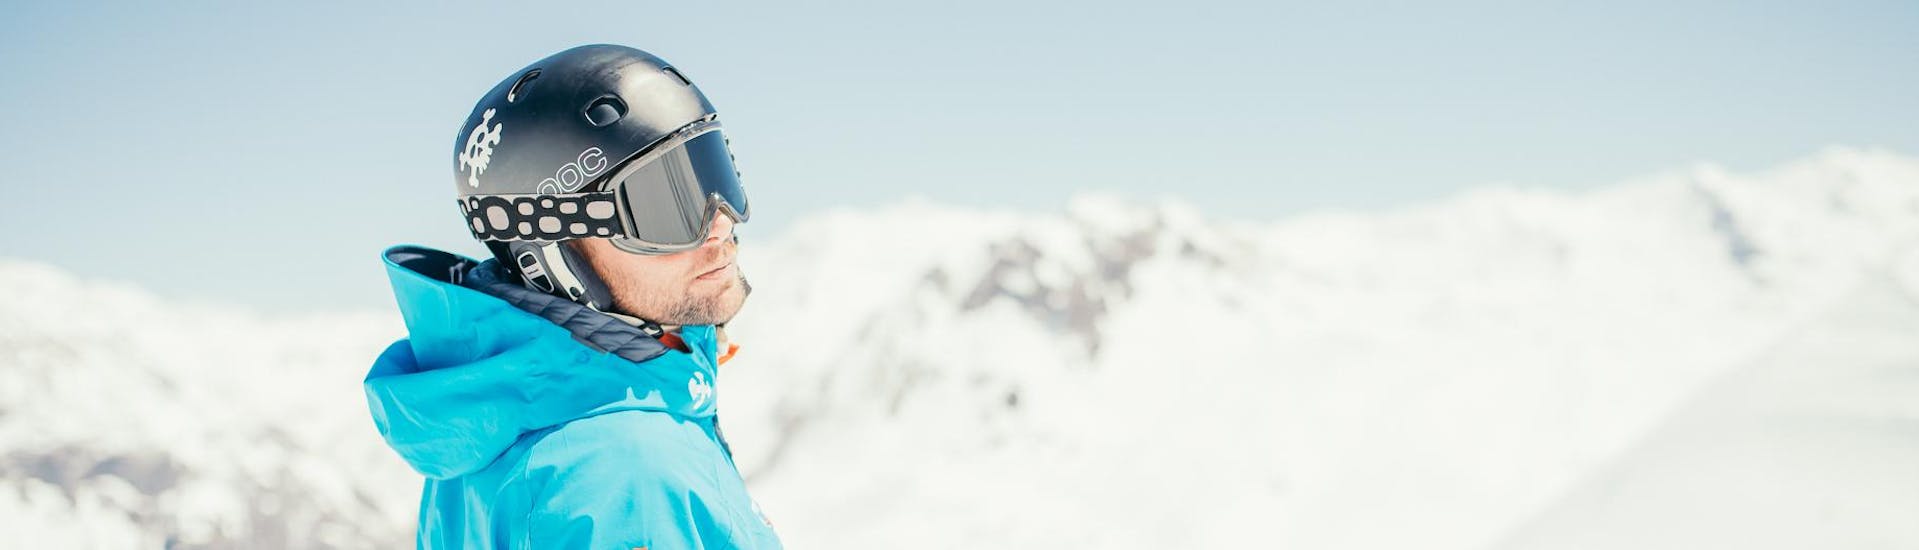 Adults are doing Adult Ski Lessons for All Levels with our partner Starski Grand Bornand.